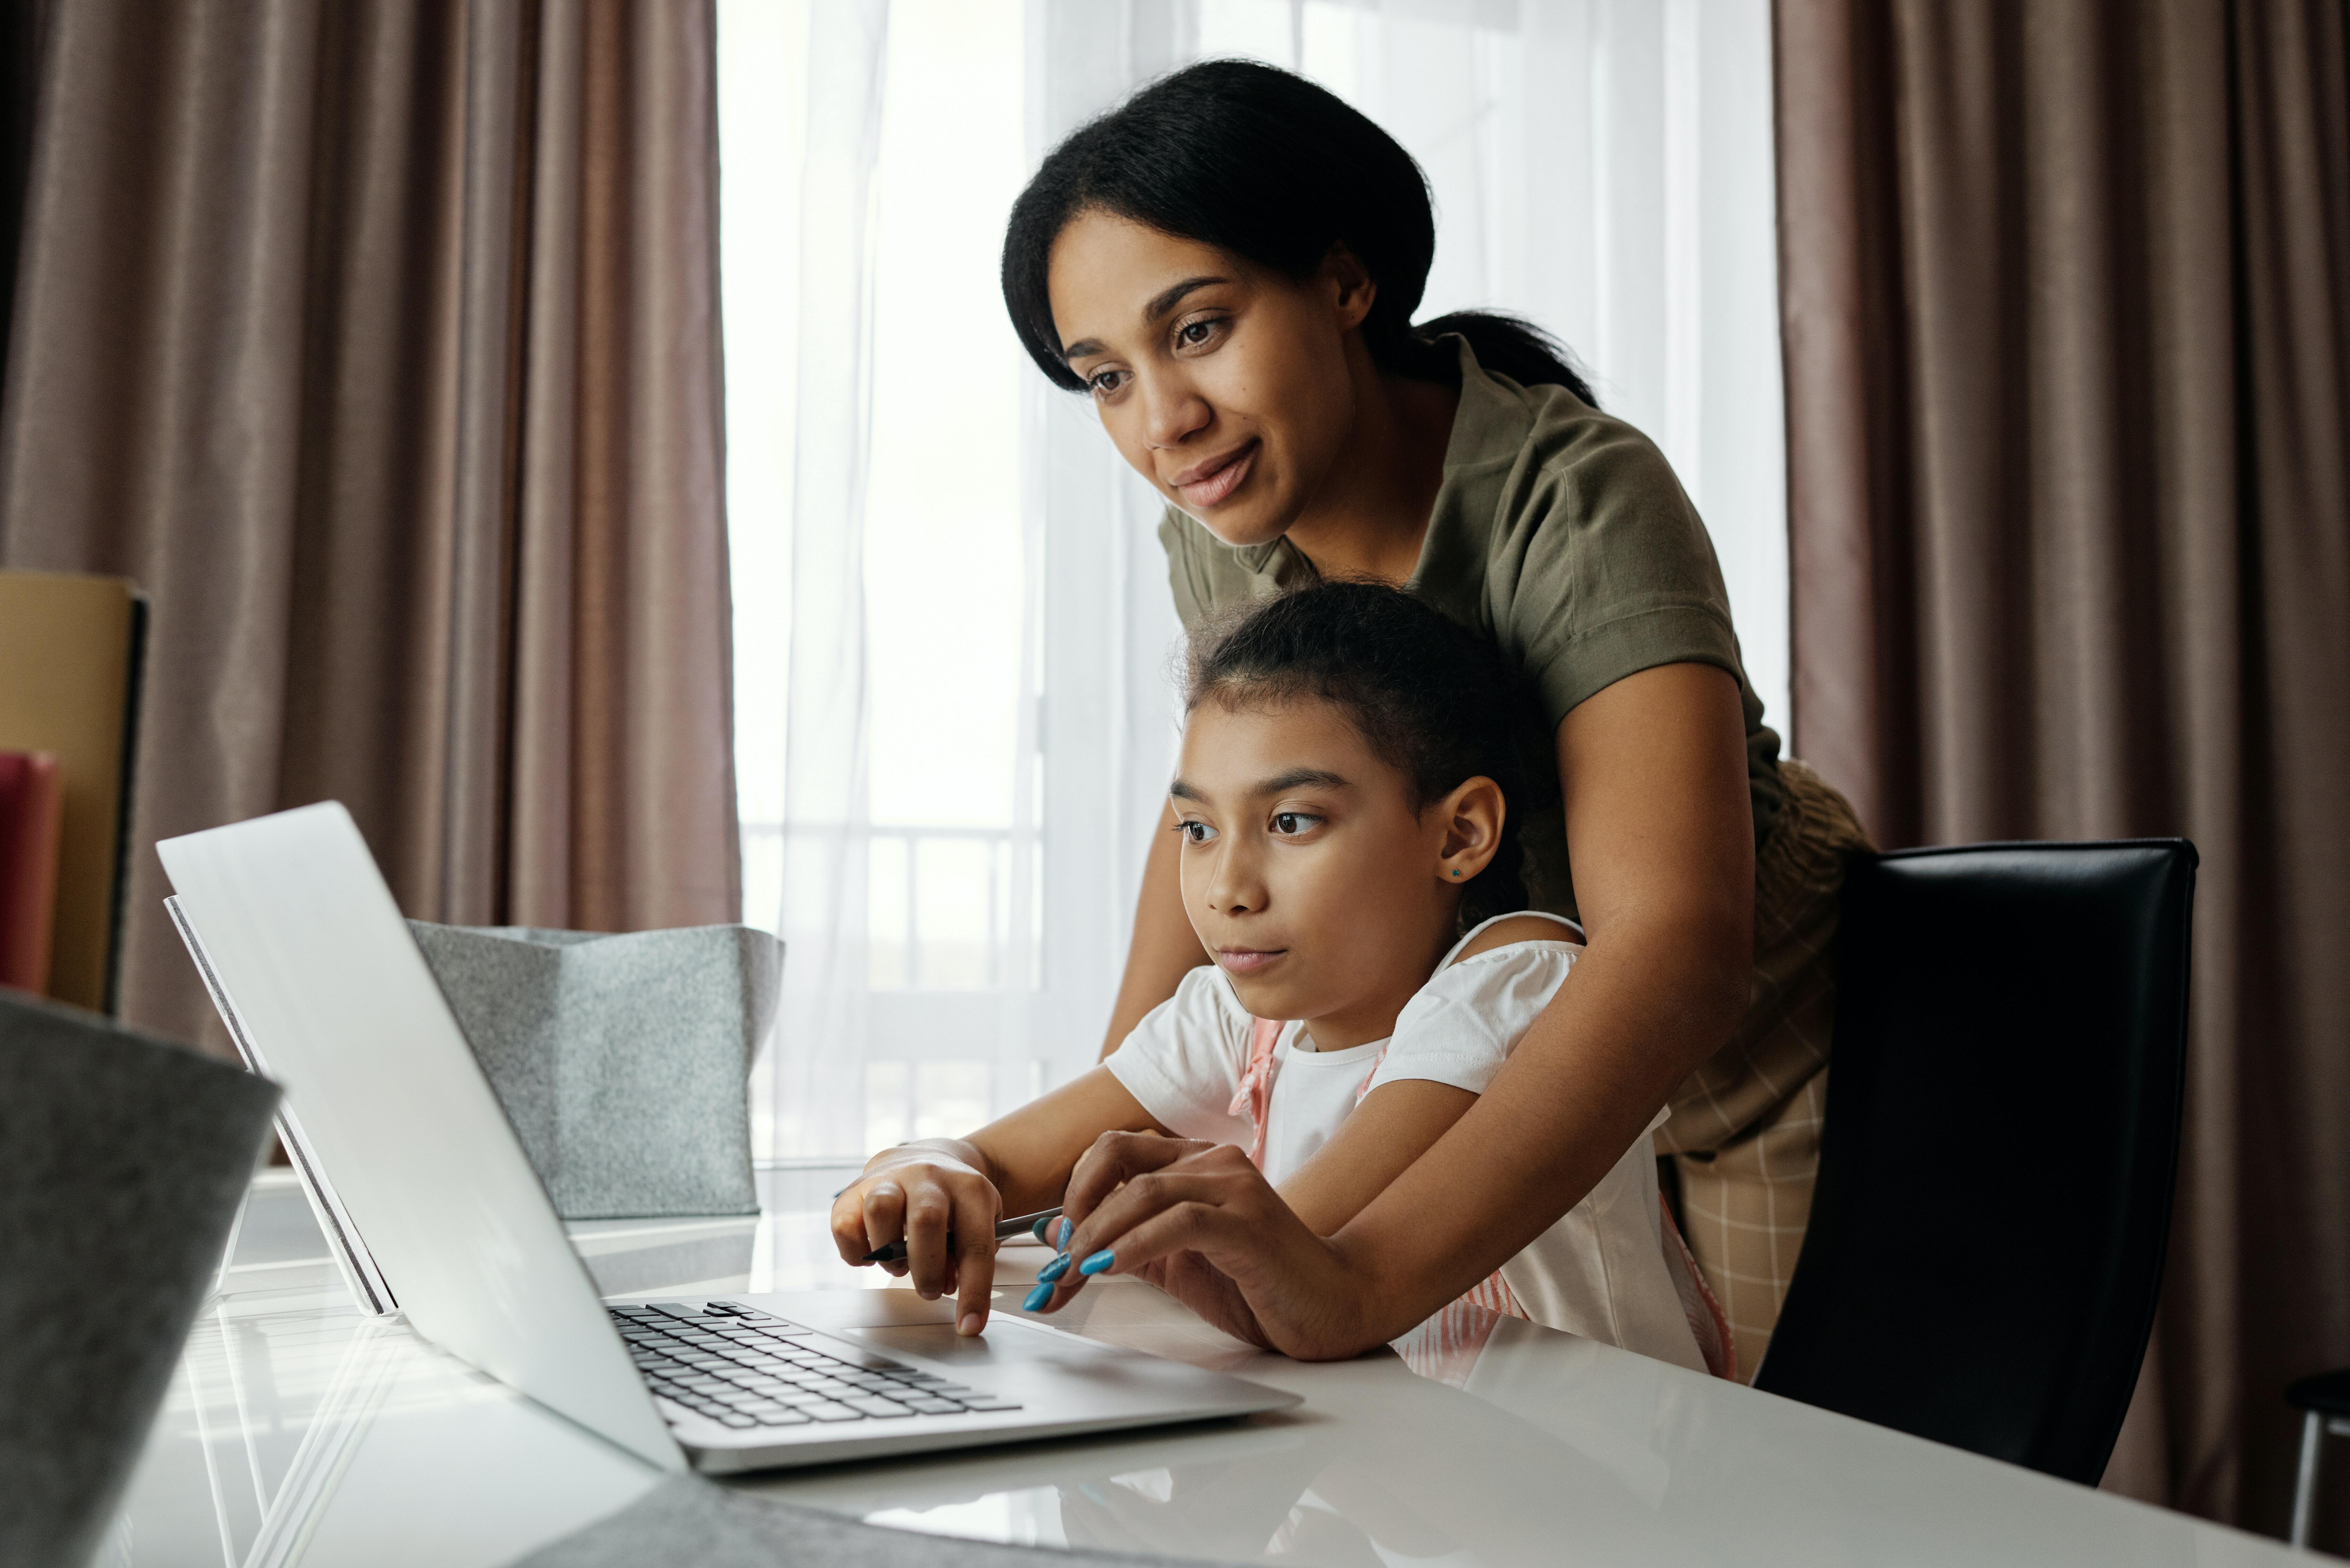 A woman standing over a child pressing a laptop